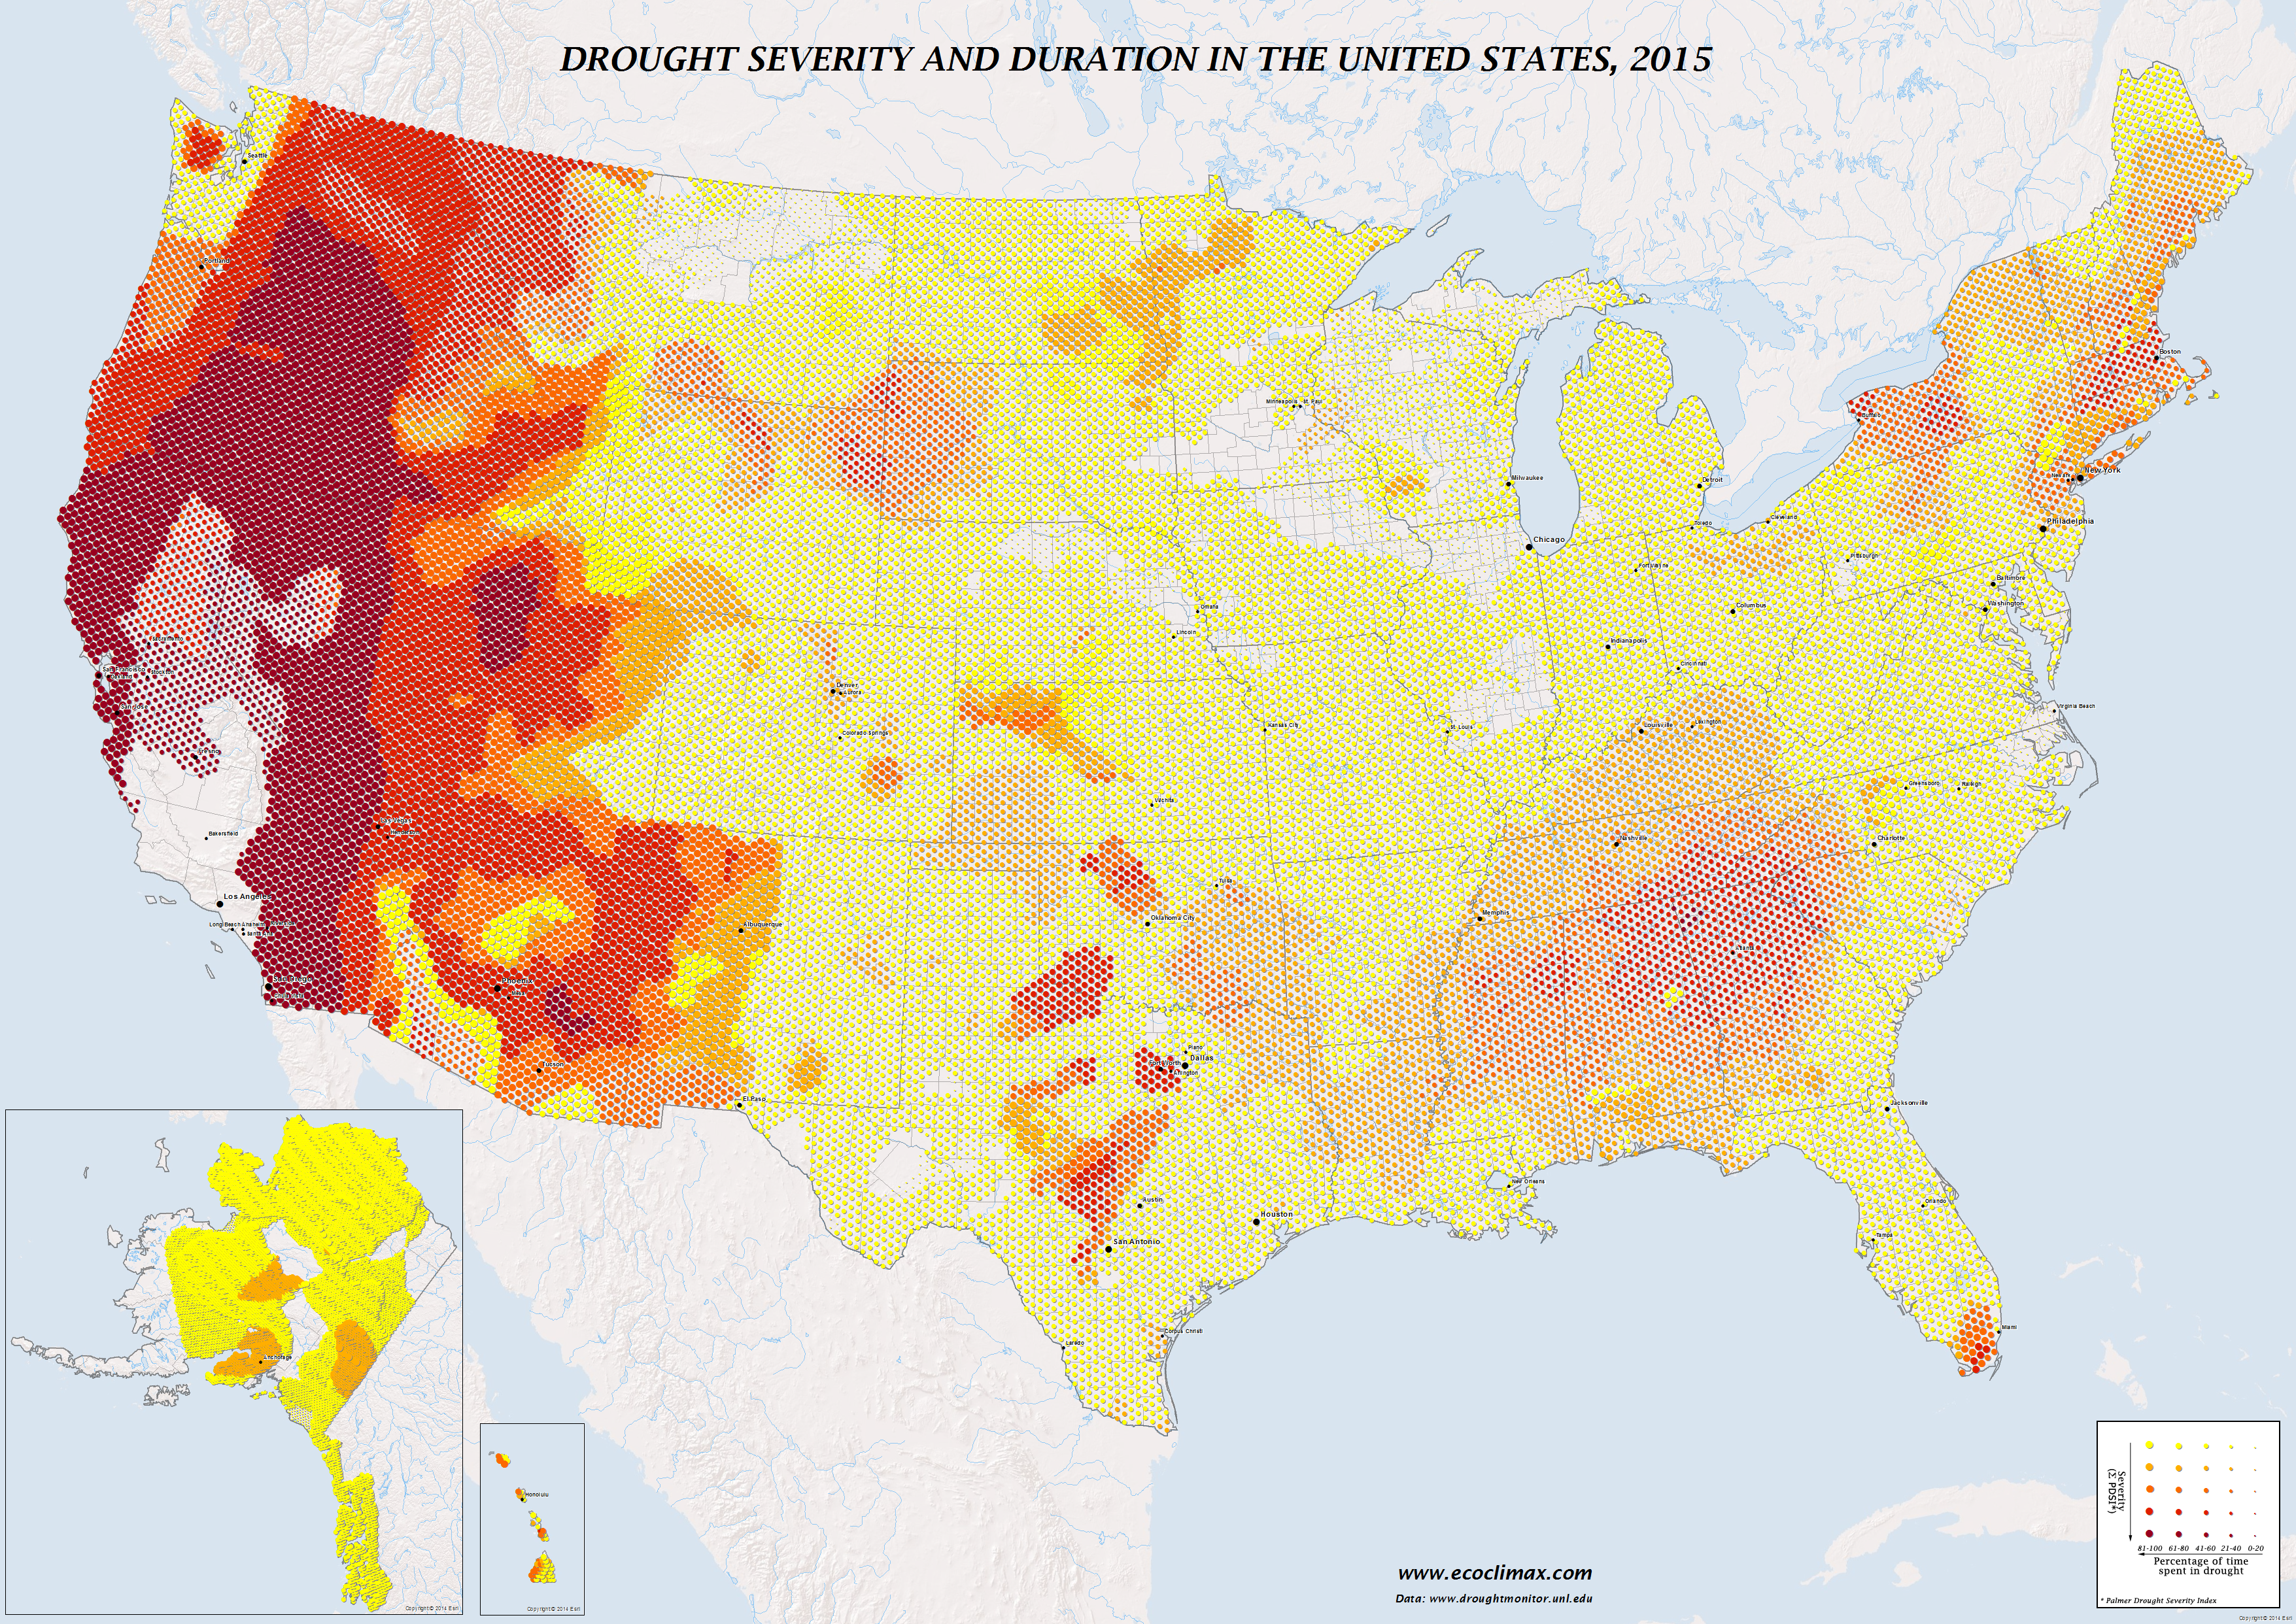 Drought severity & duration in the U.S, 2015